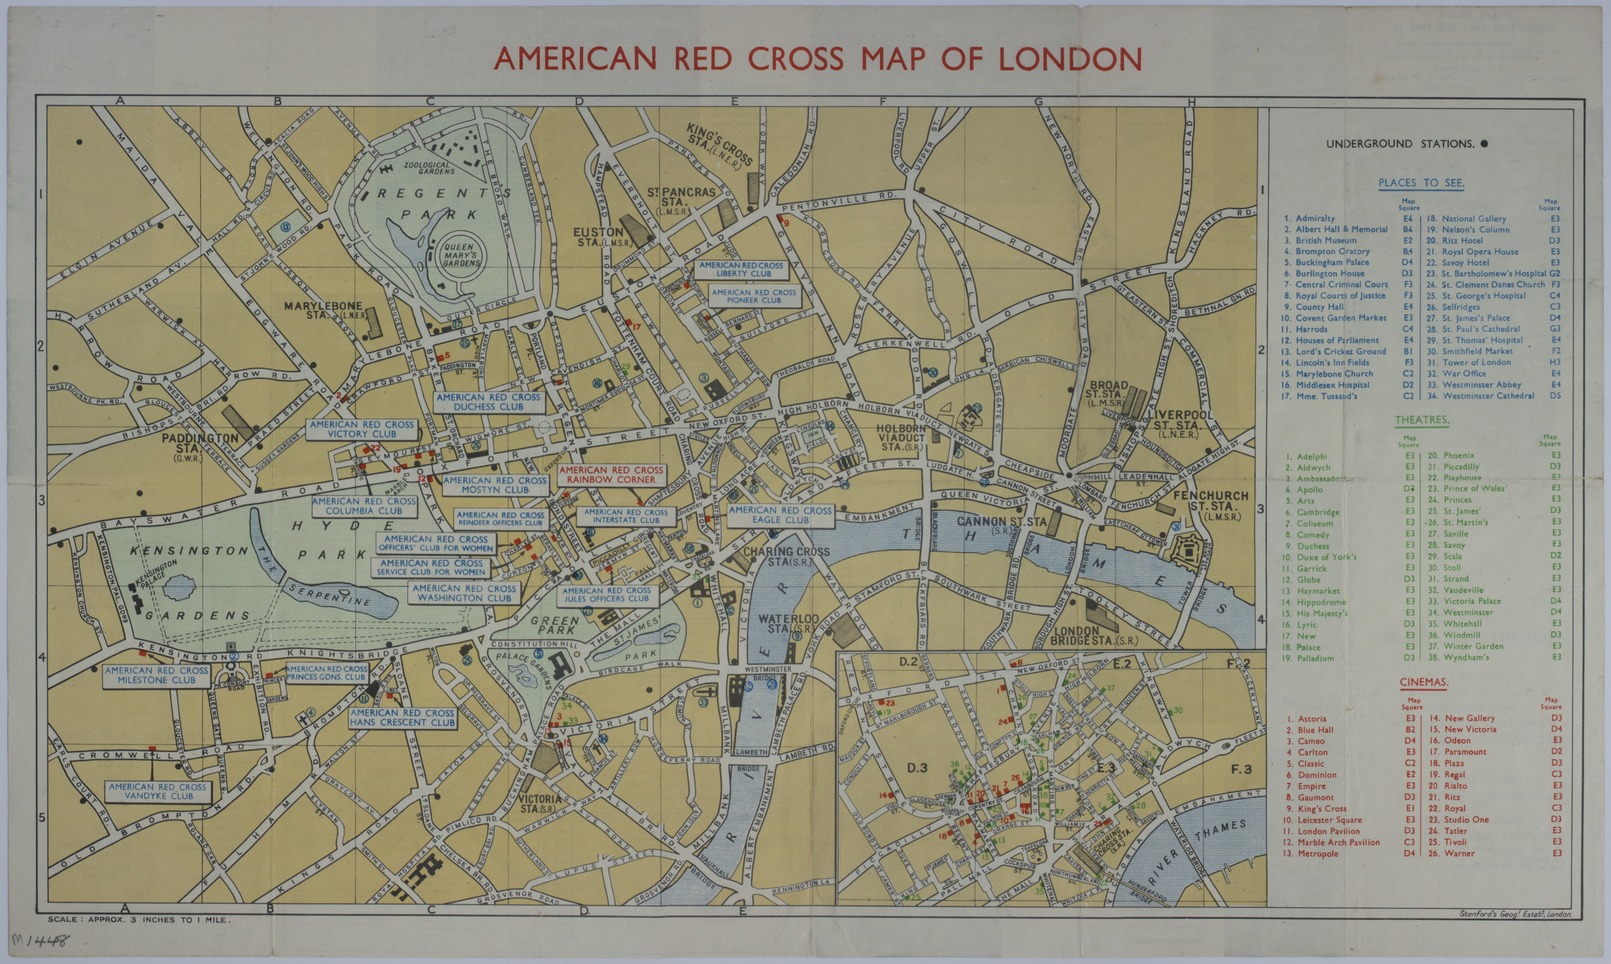 Map of American Red Cross Clubs in London